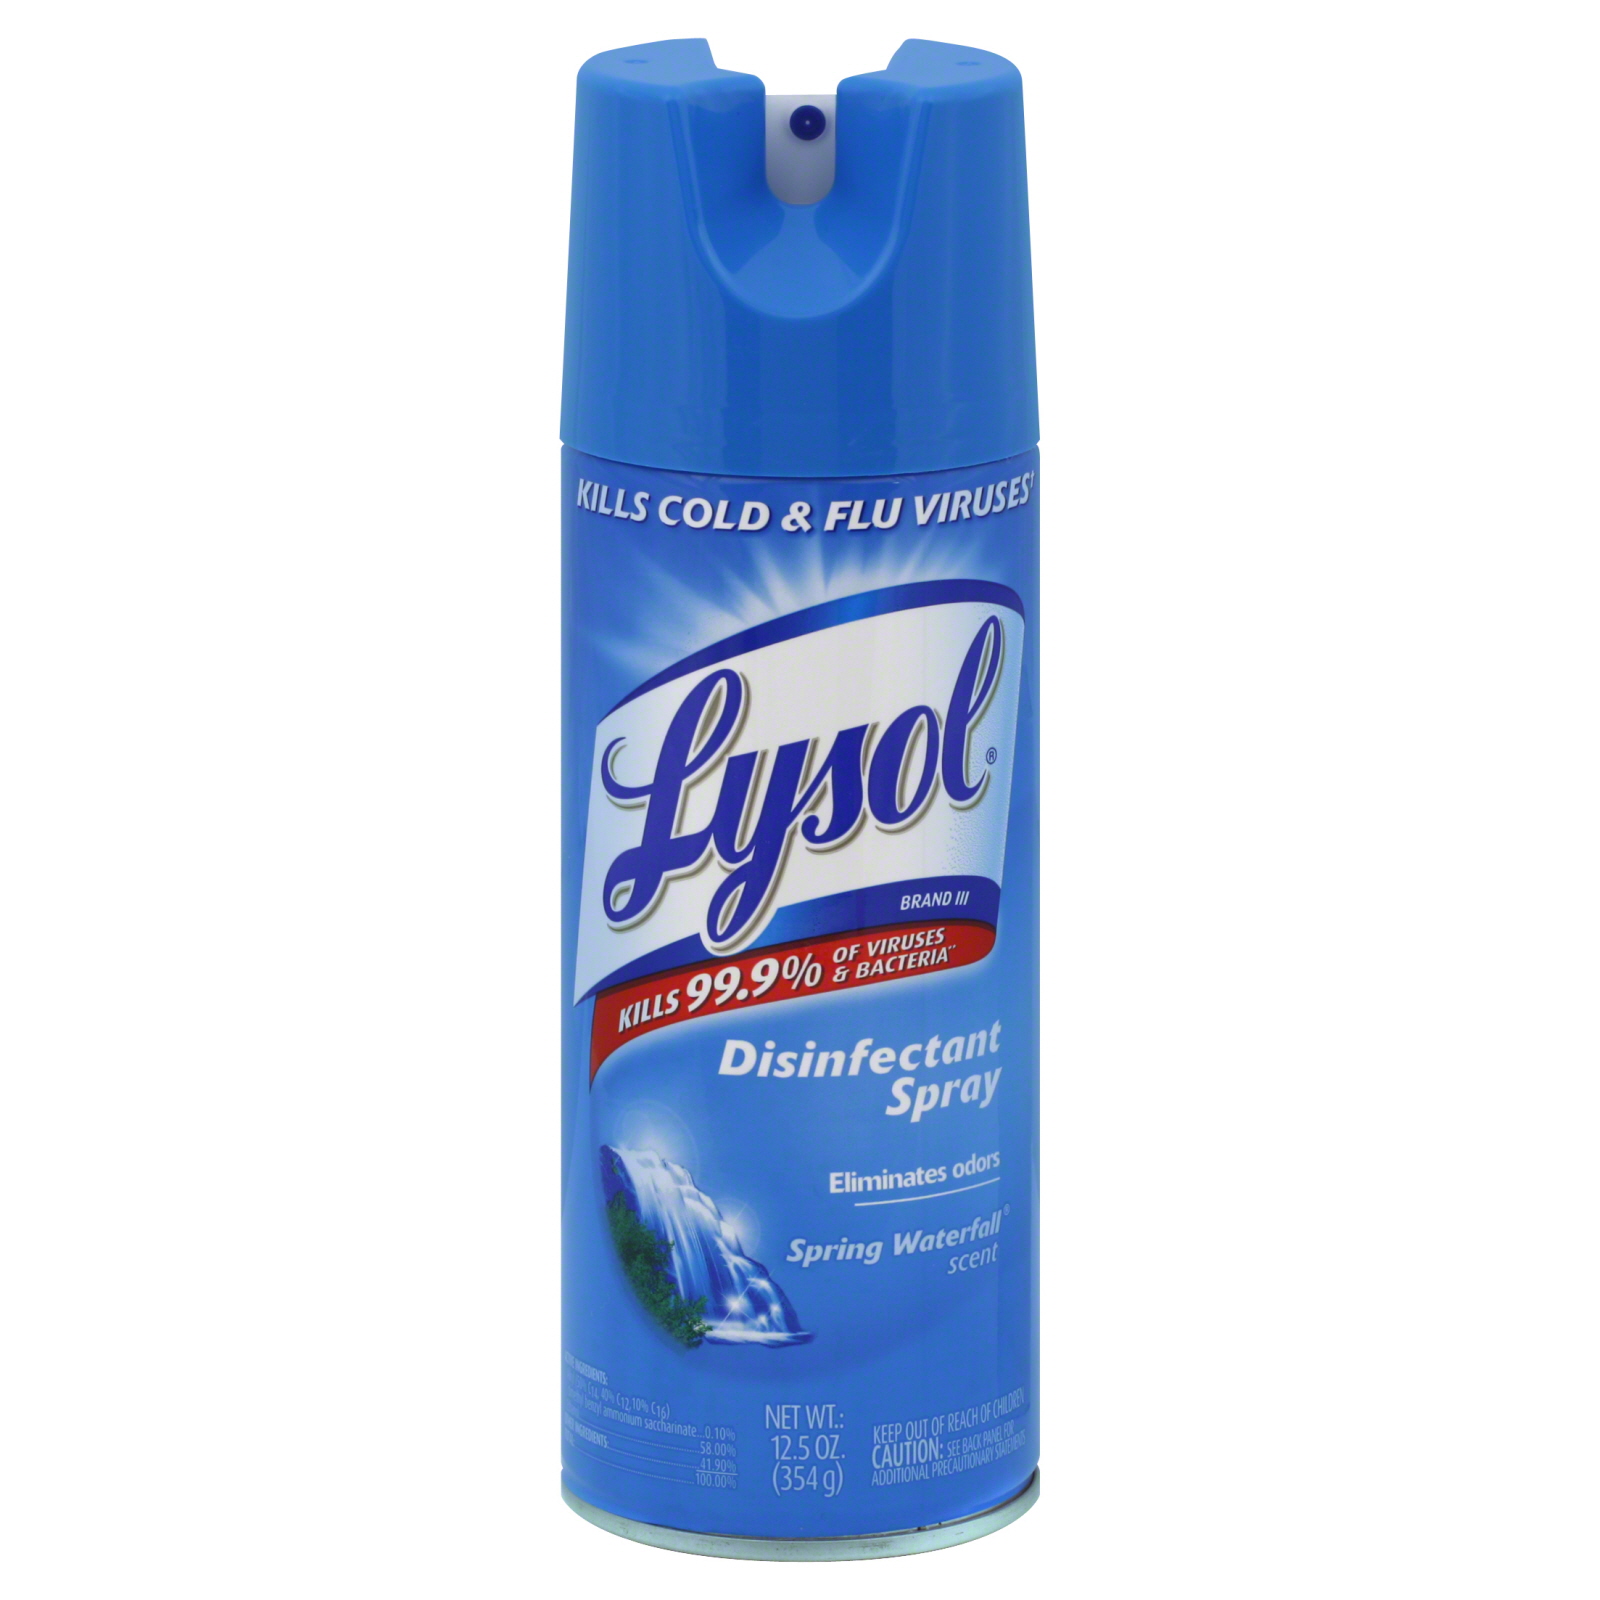 Lysol Disinfectant Spray, Spring Waterfall Scent 12.5 oz (354 g)